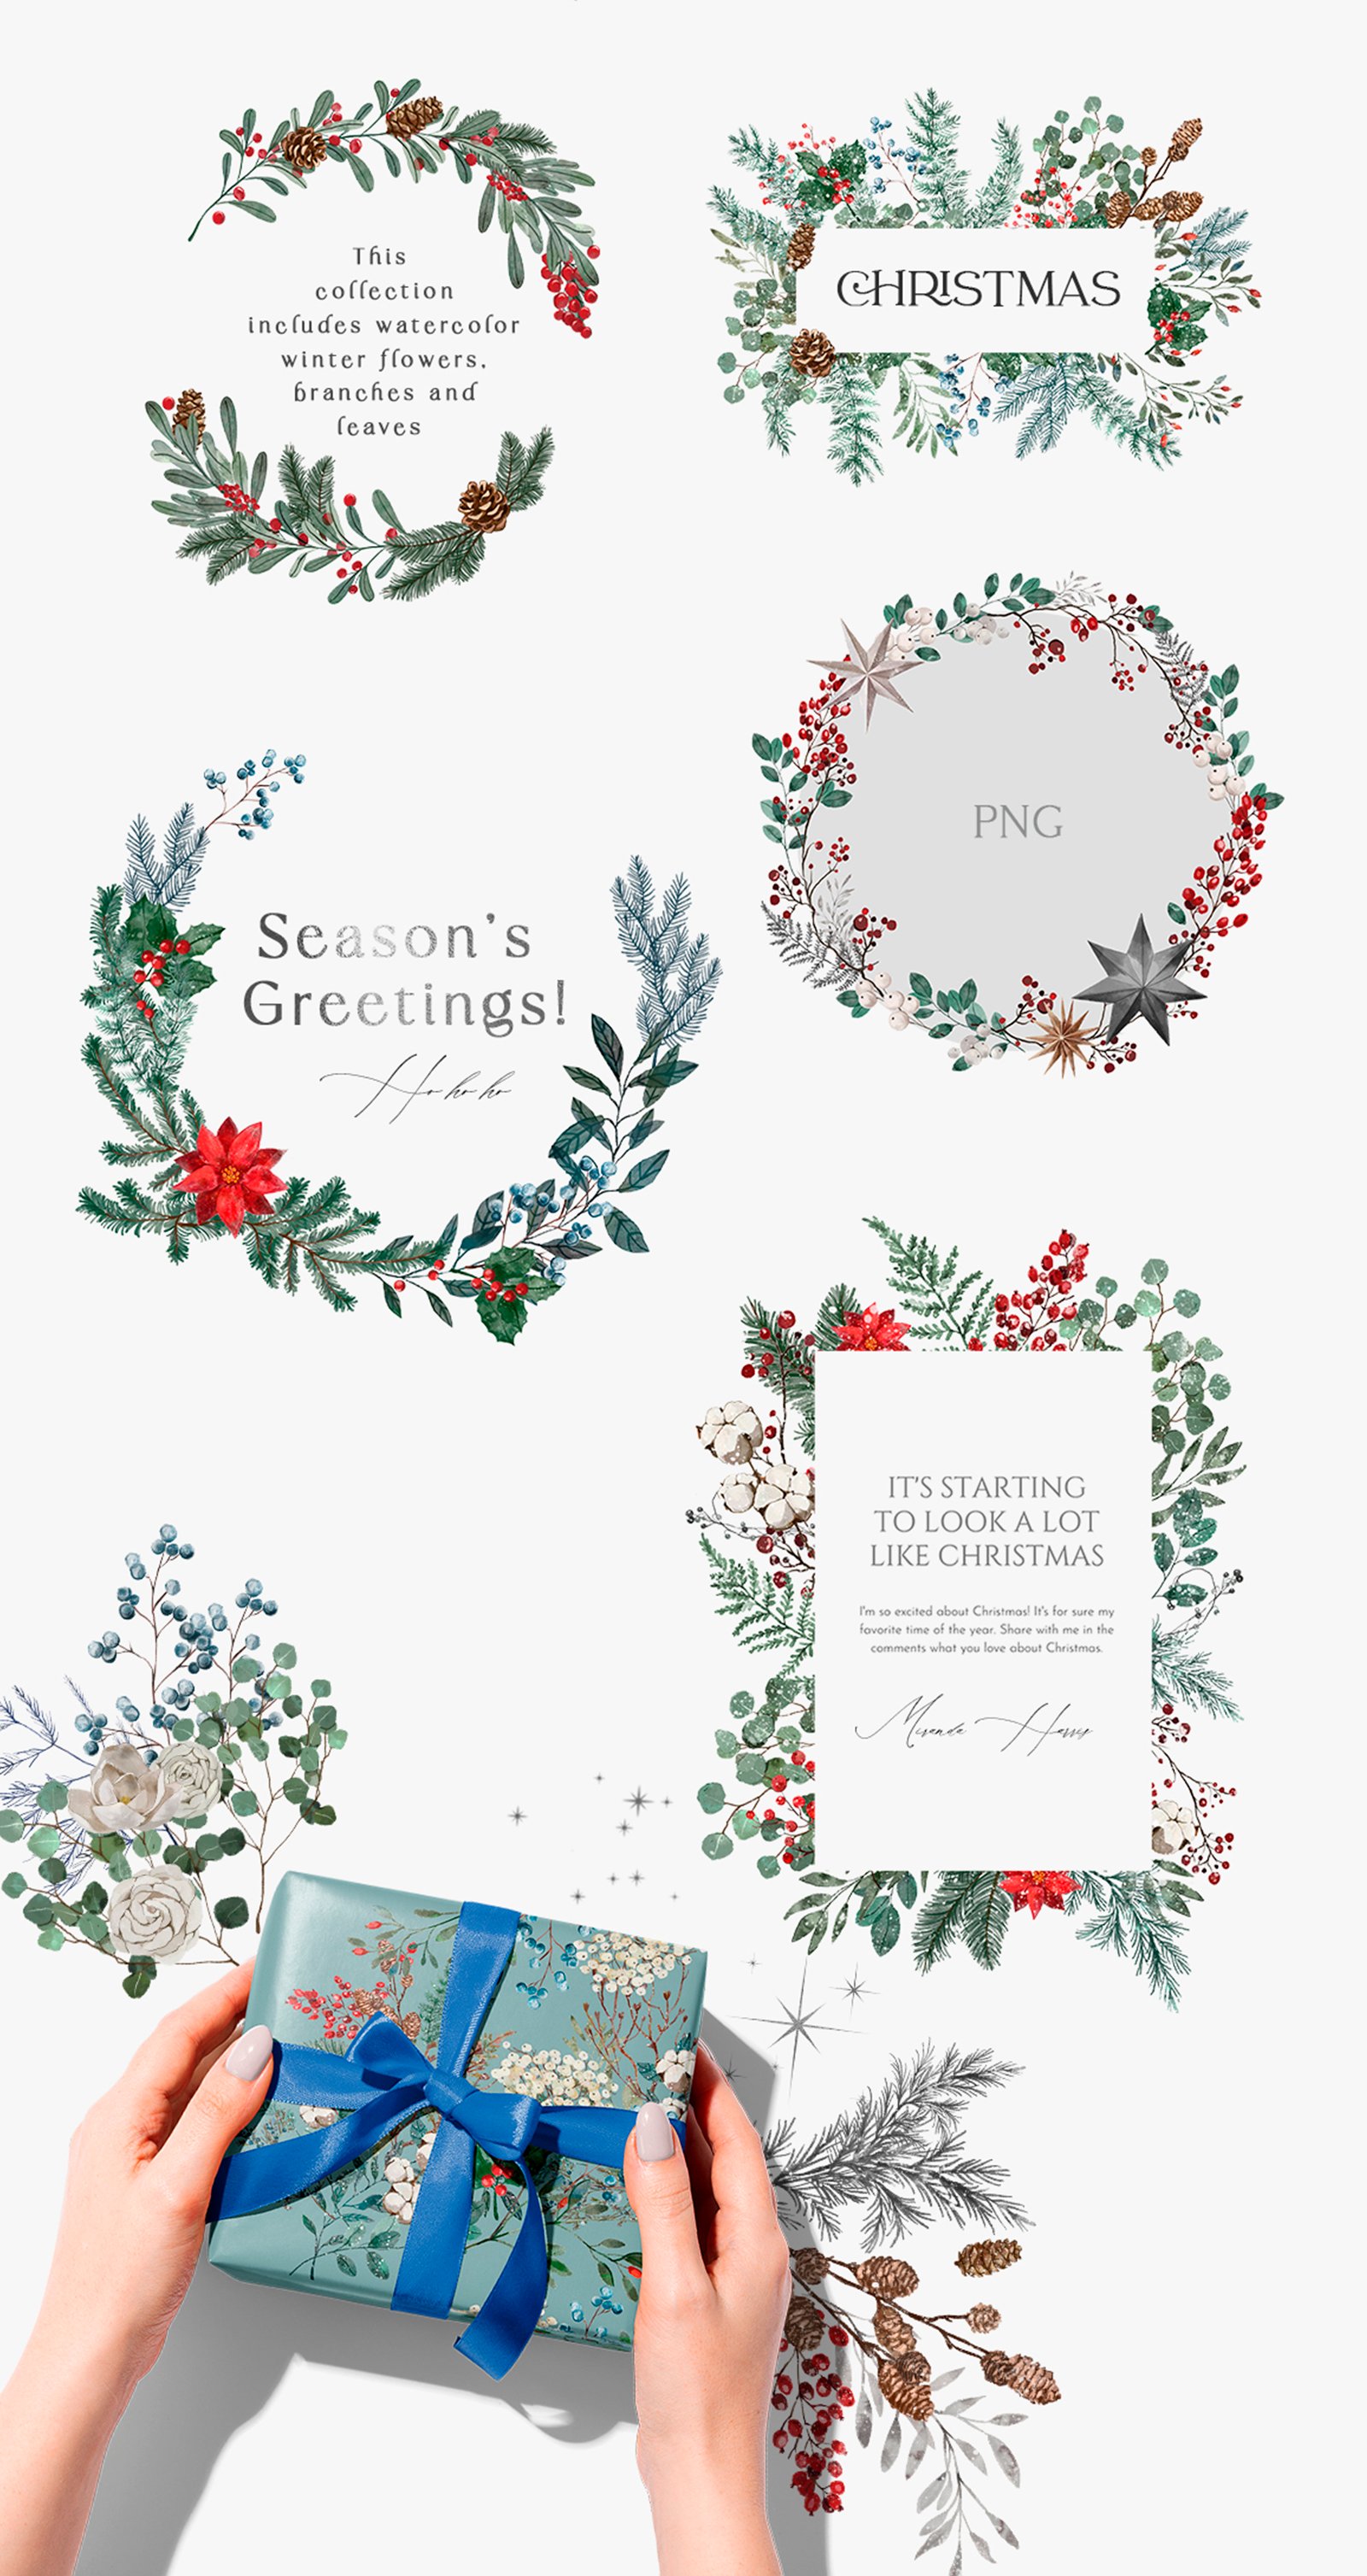 Winter Christmas Greenery Collection - Design Cuts